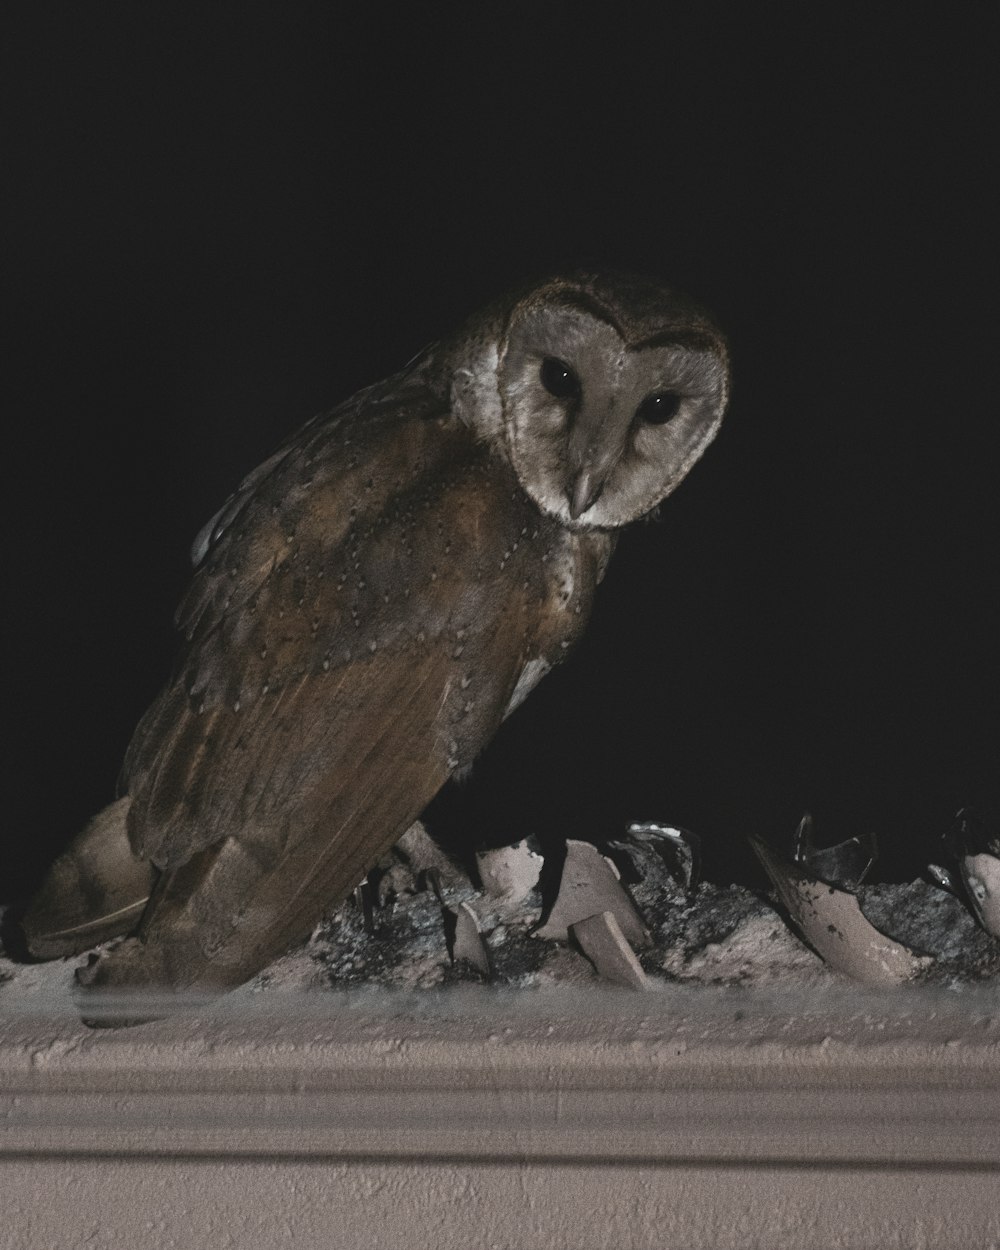 an owl is sitting on a ledge at night